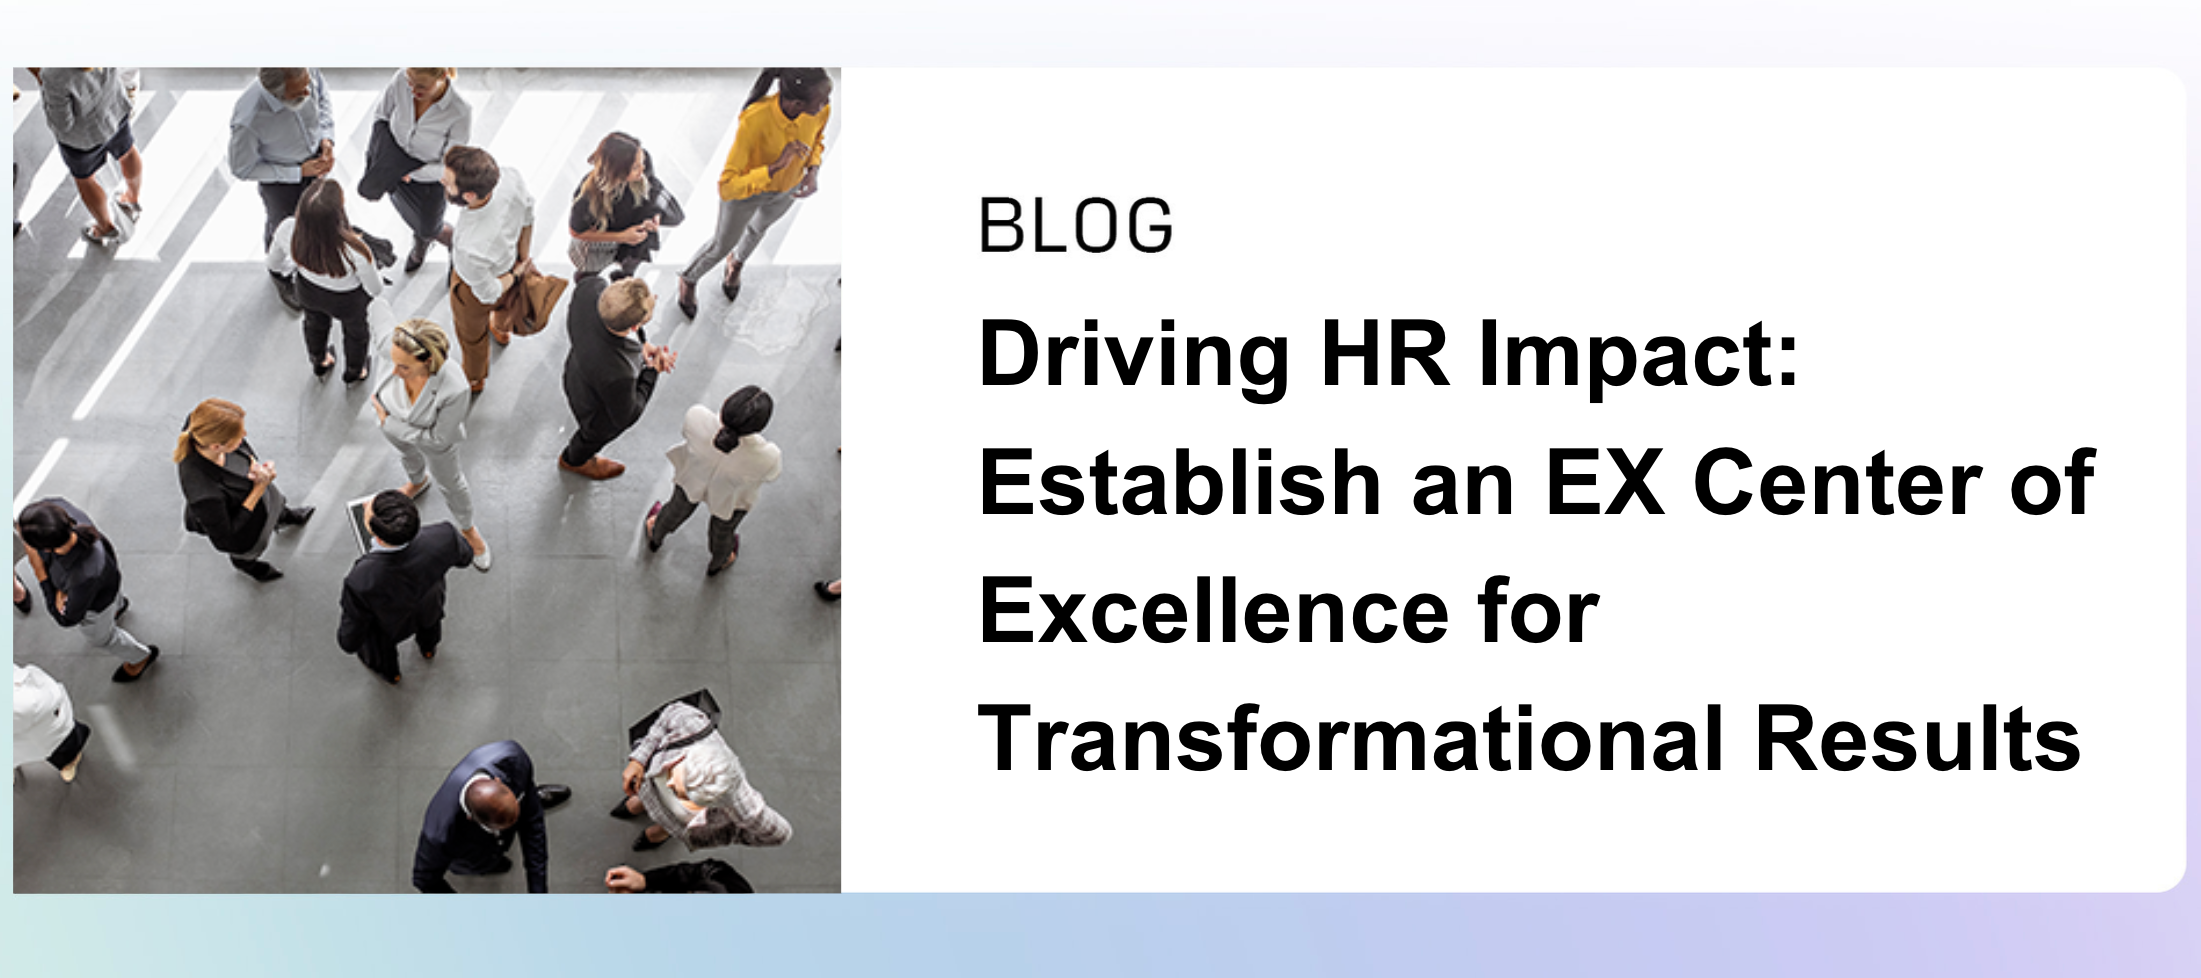 Driving HR Impact: Establish an EX Center of Excellence for Transformational Results